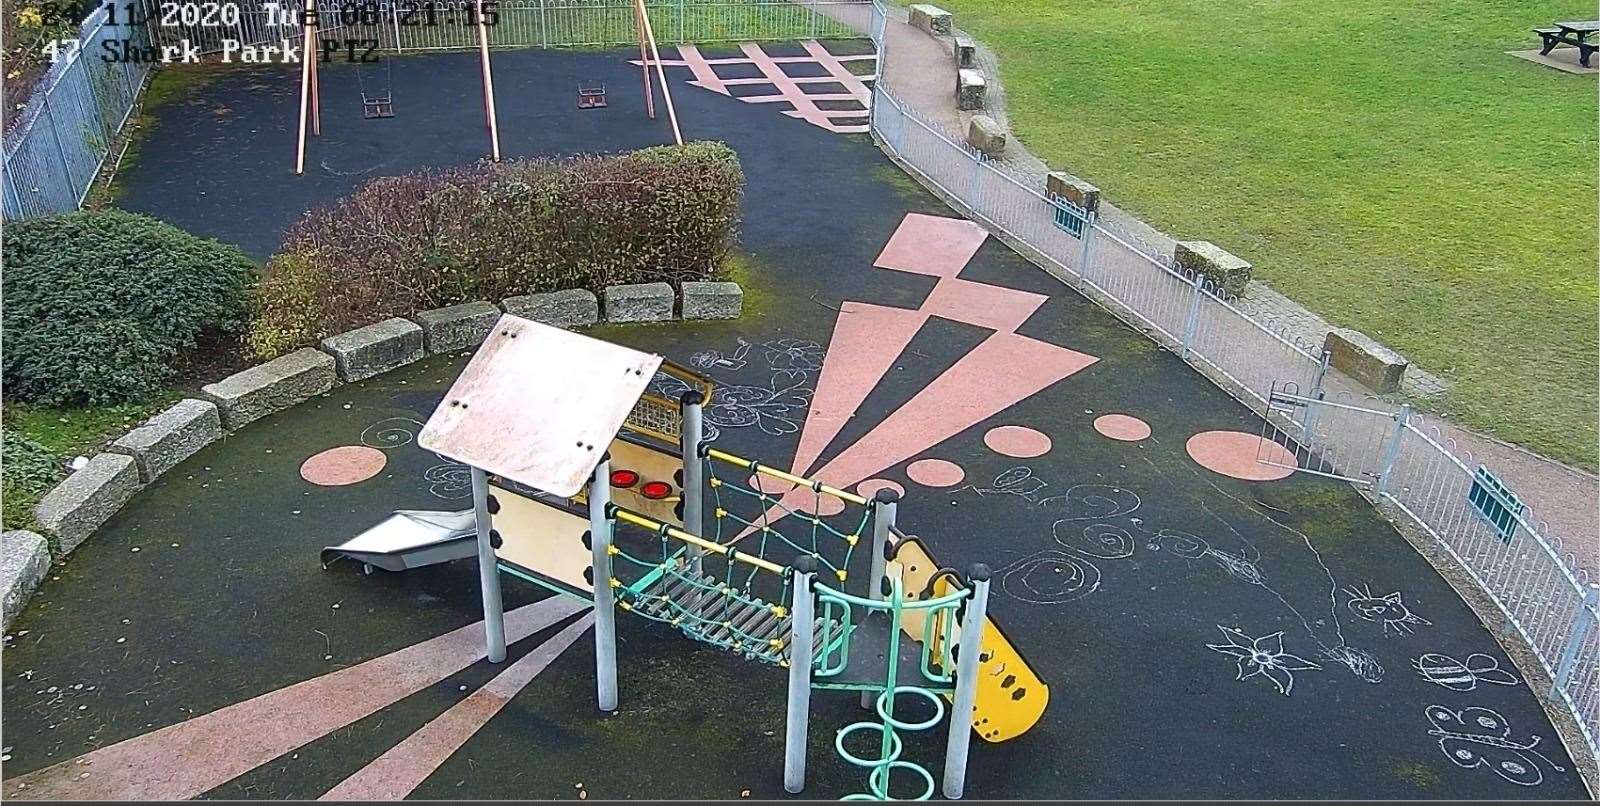 CCTV pictures shared on the Chatham Maritime Trust's post to residents show the drawings on the safety matting in the playground on St Mary's Island